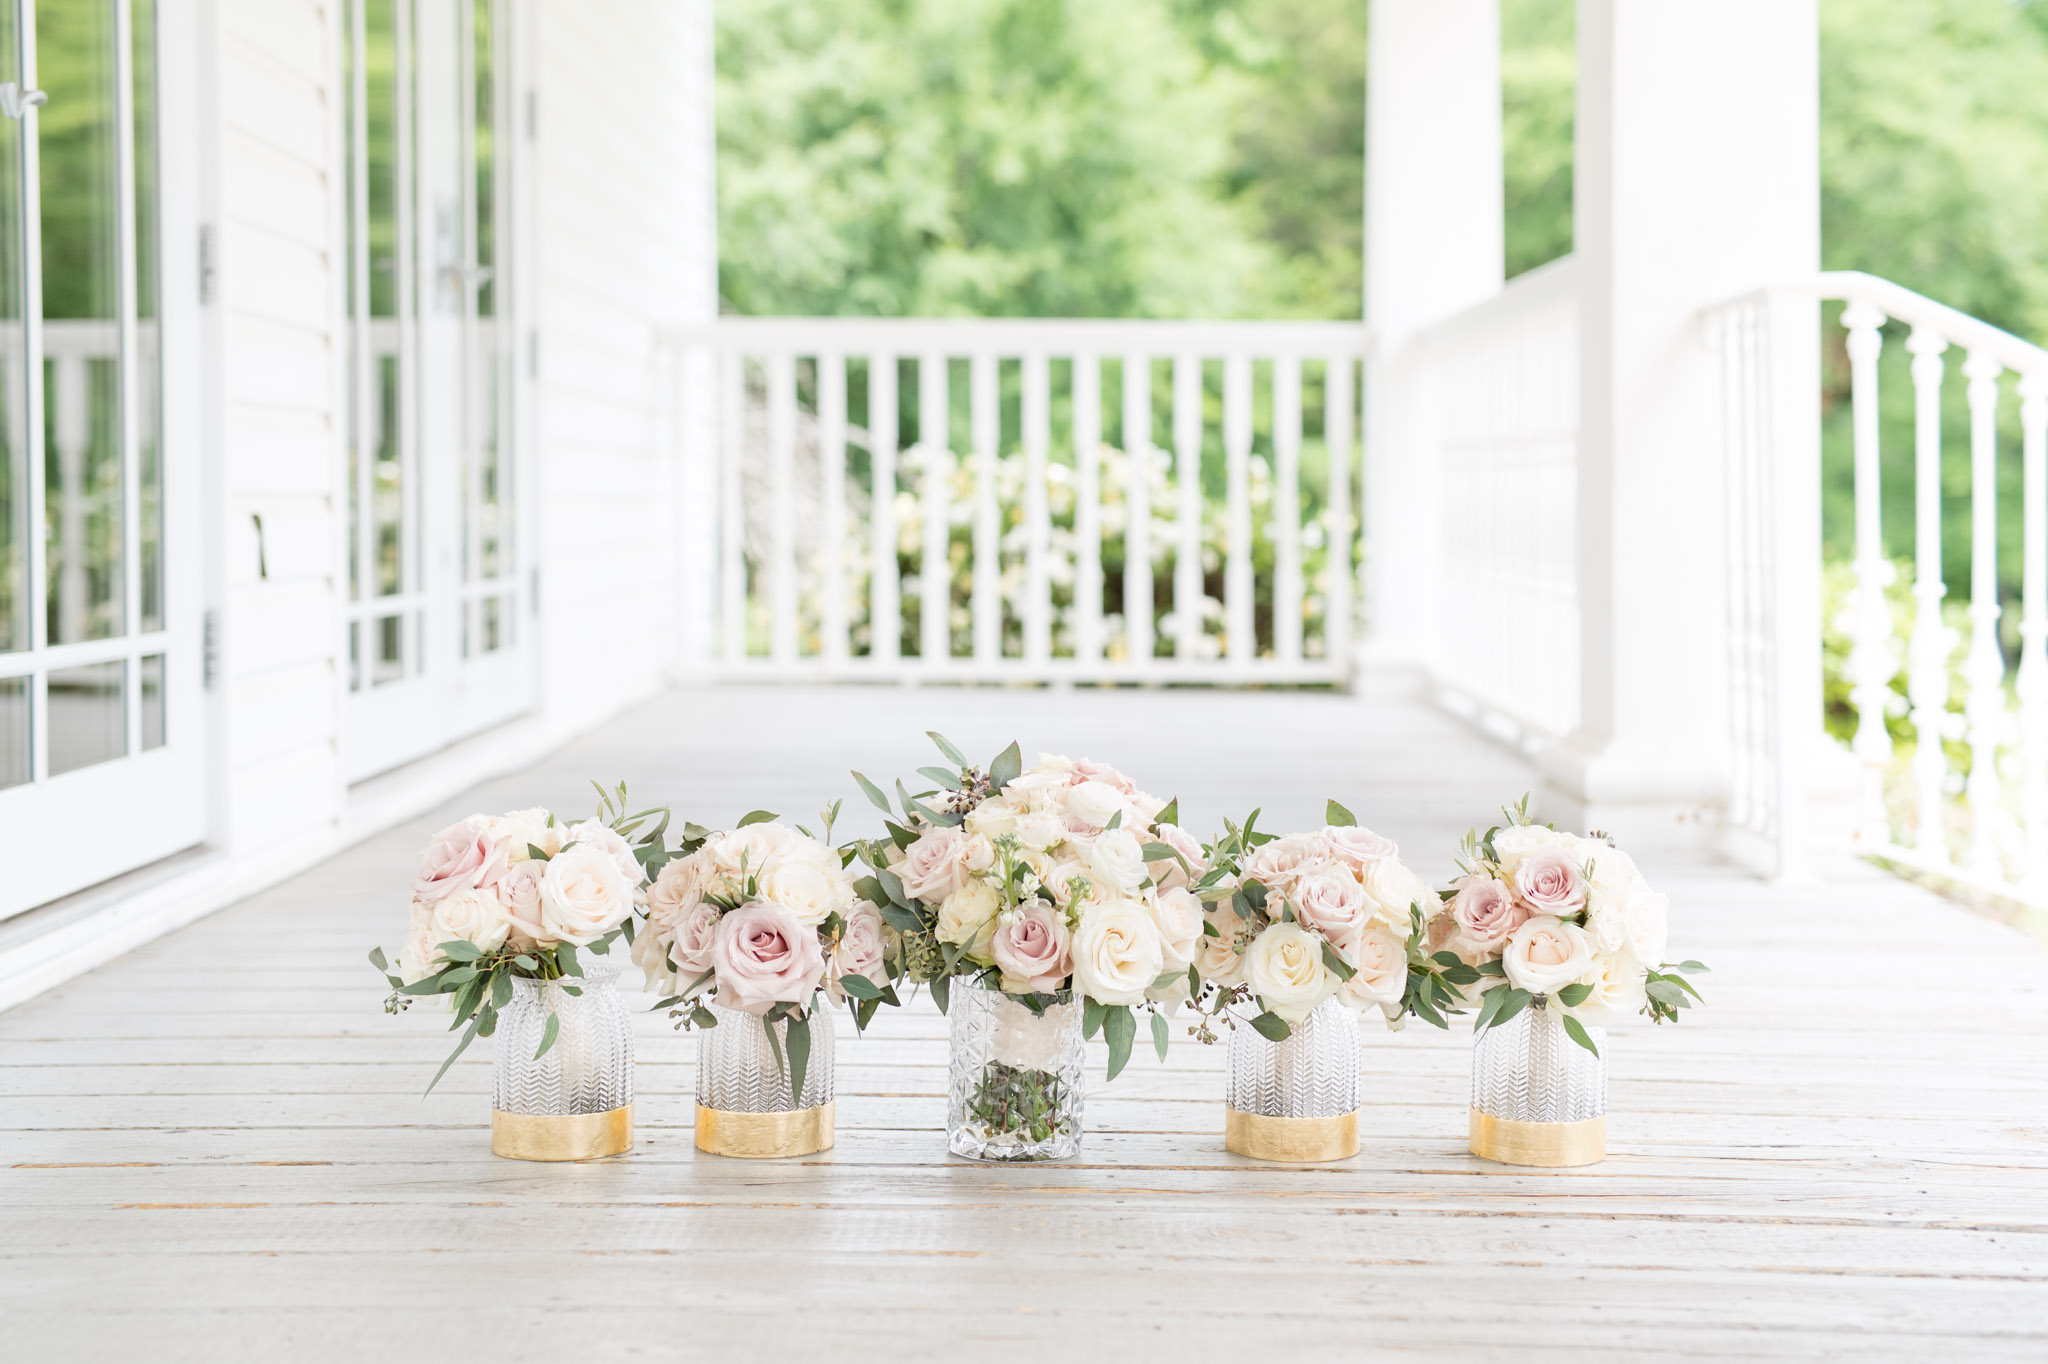 Bridal party bouquets sit in vases.